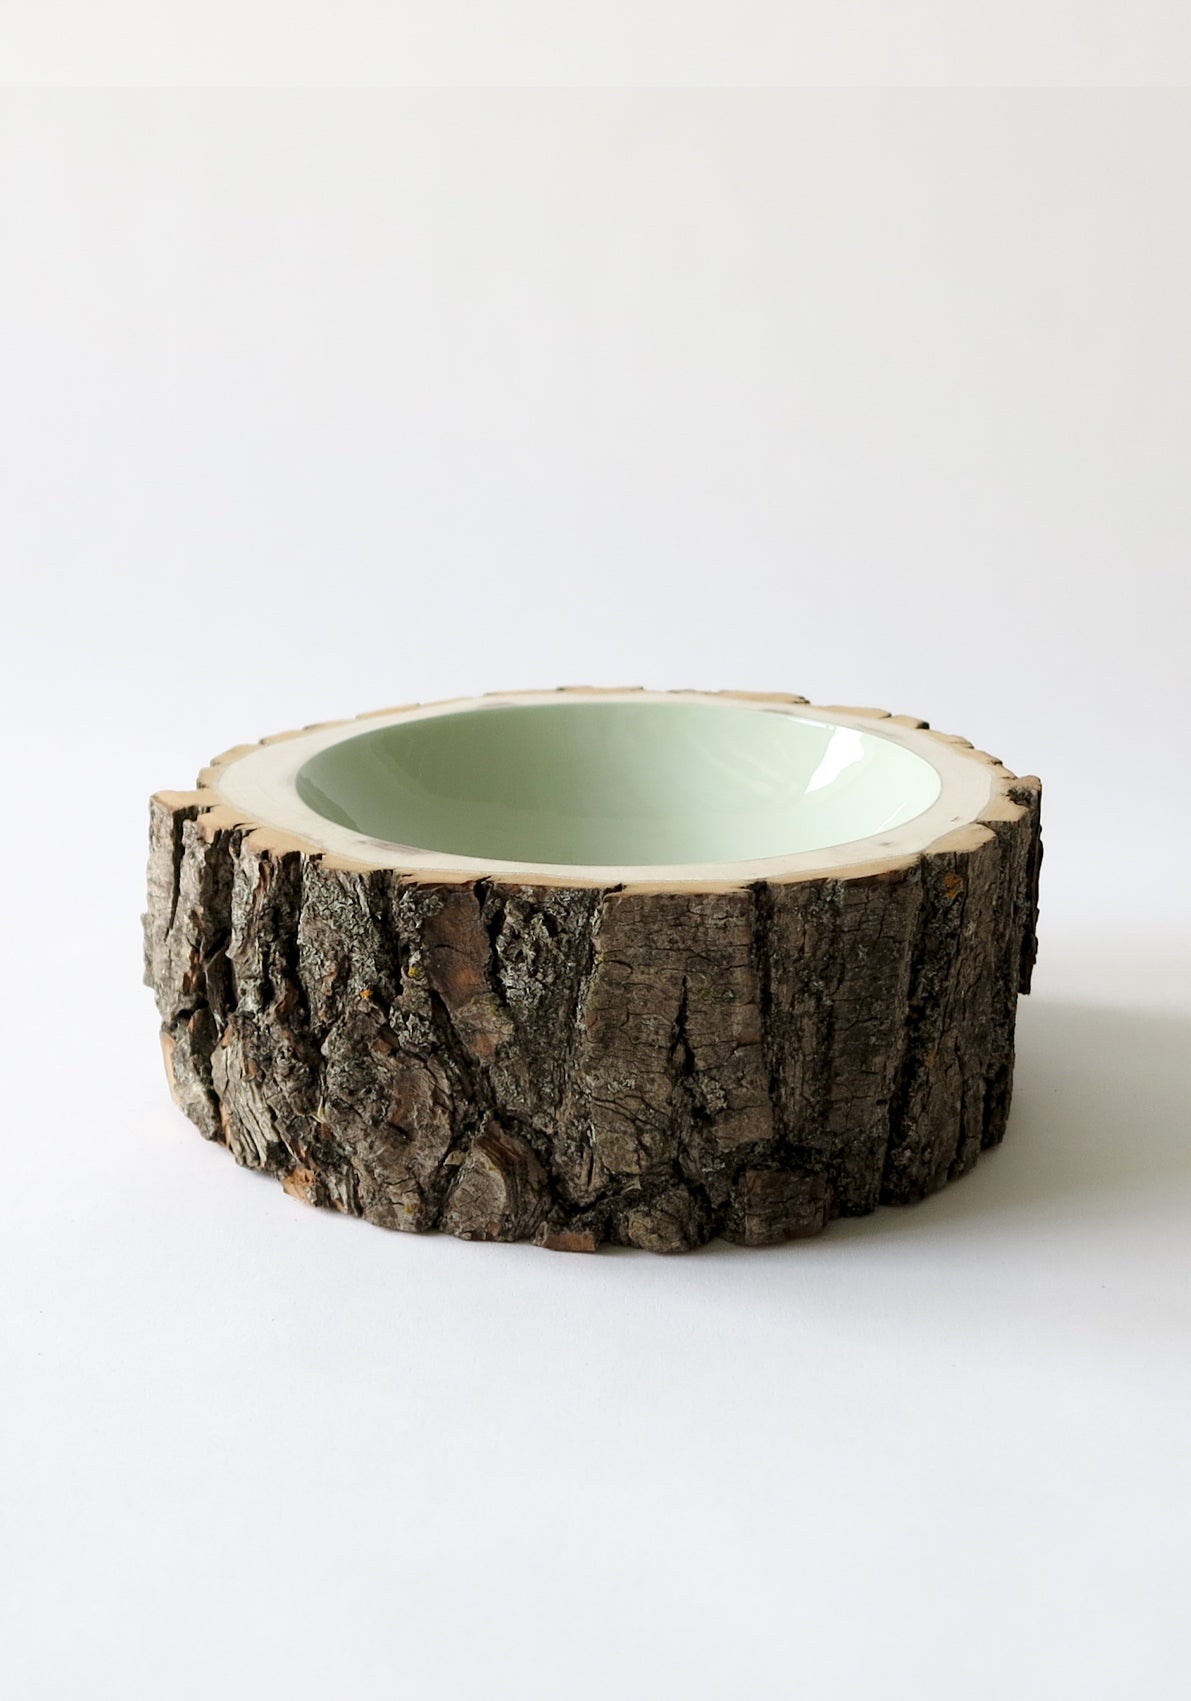 Size 9 Log Bowl - Large wooden bowl with rough willow bark, glossy interior is a pale eucalyptus green colour.